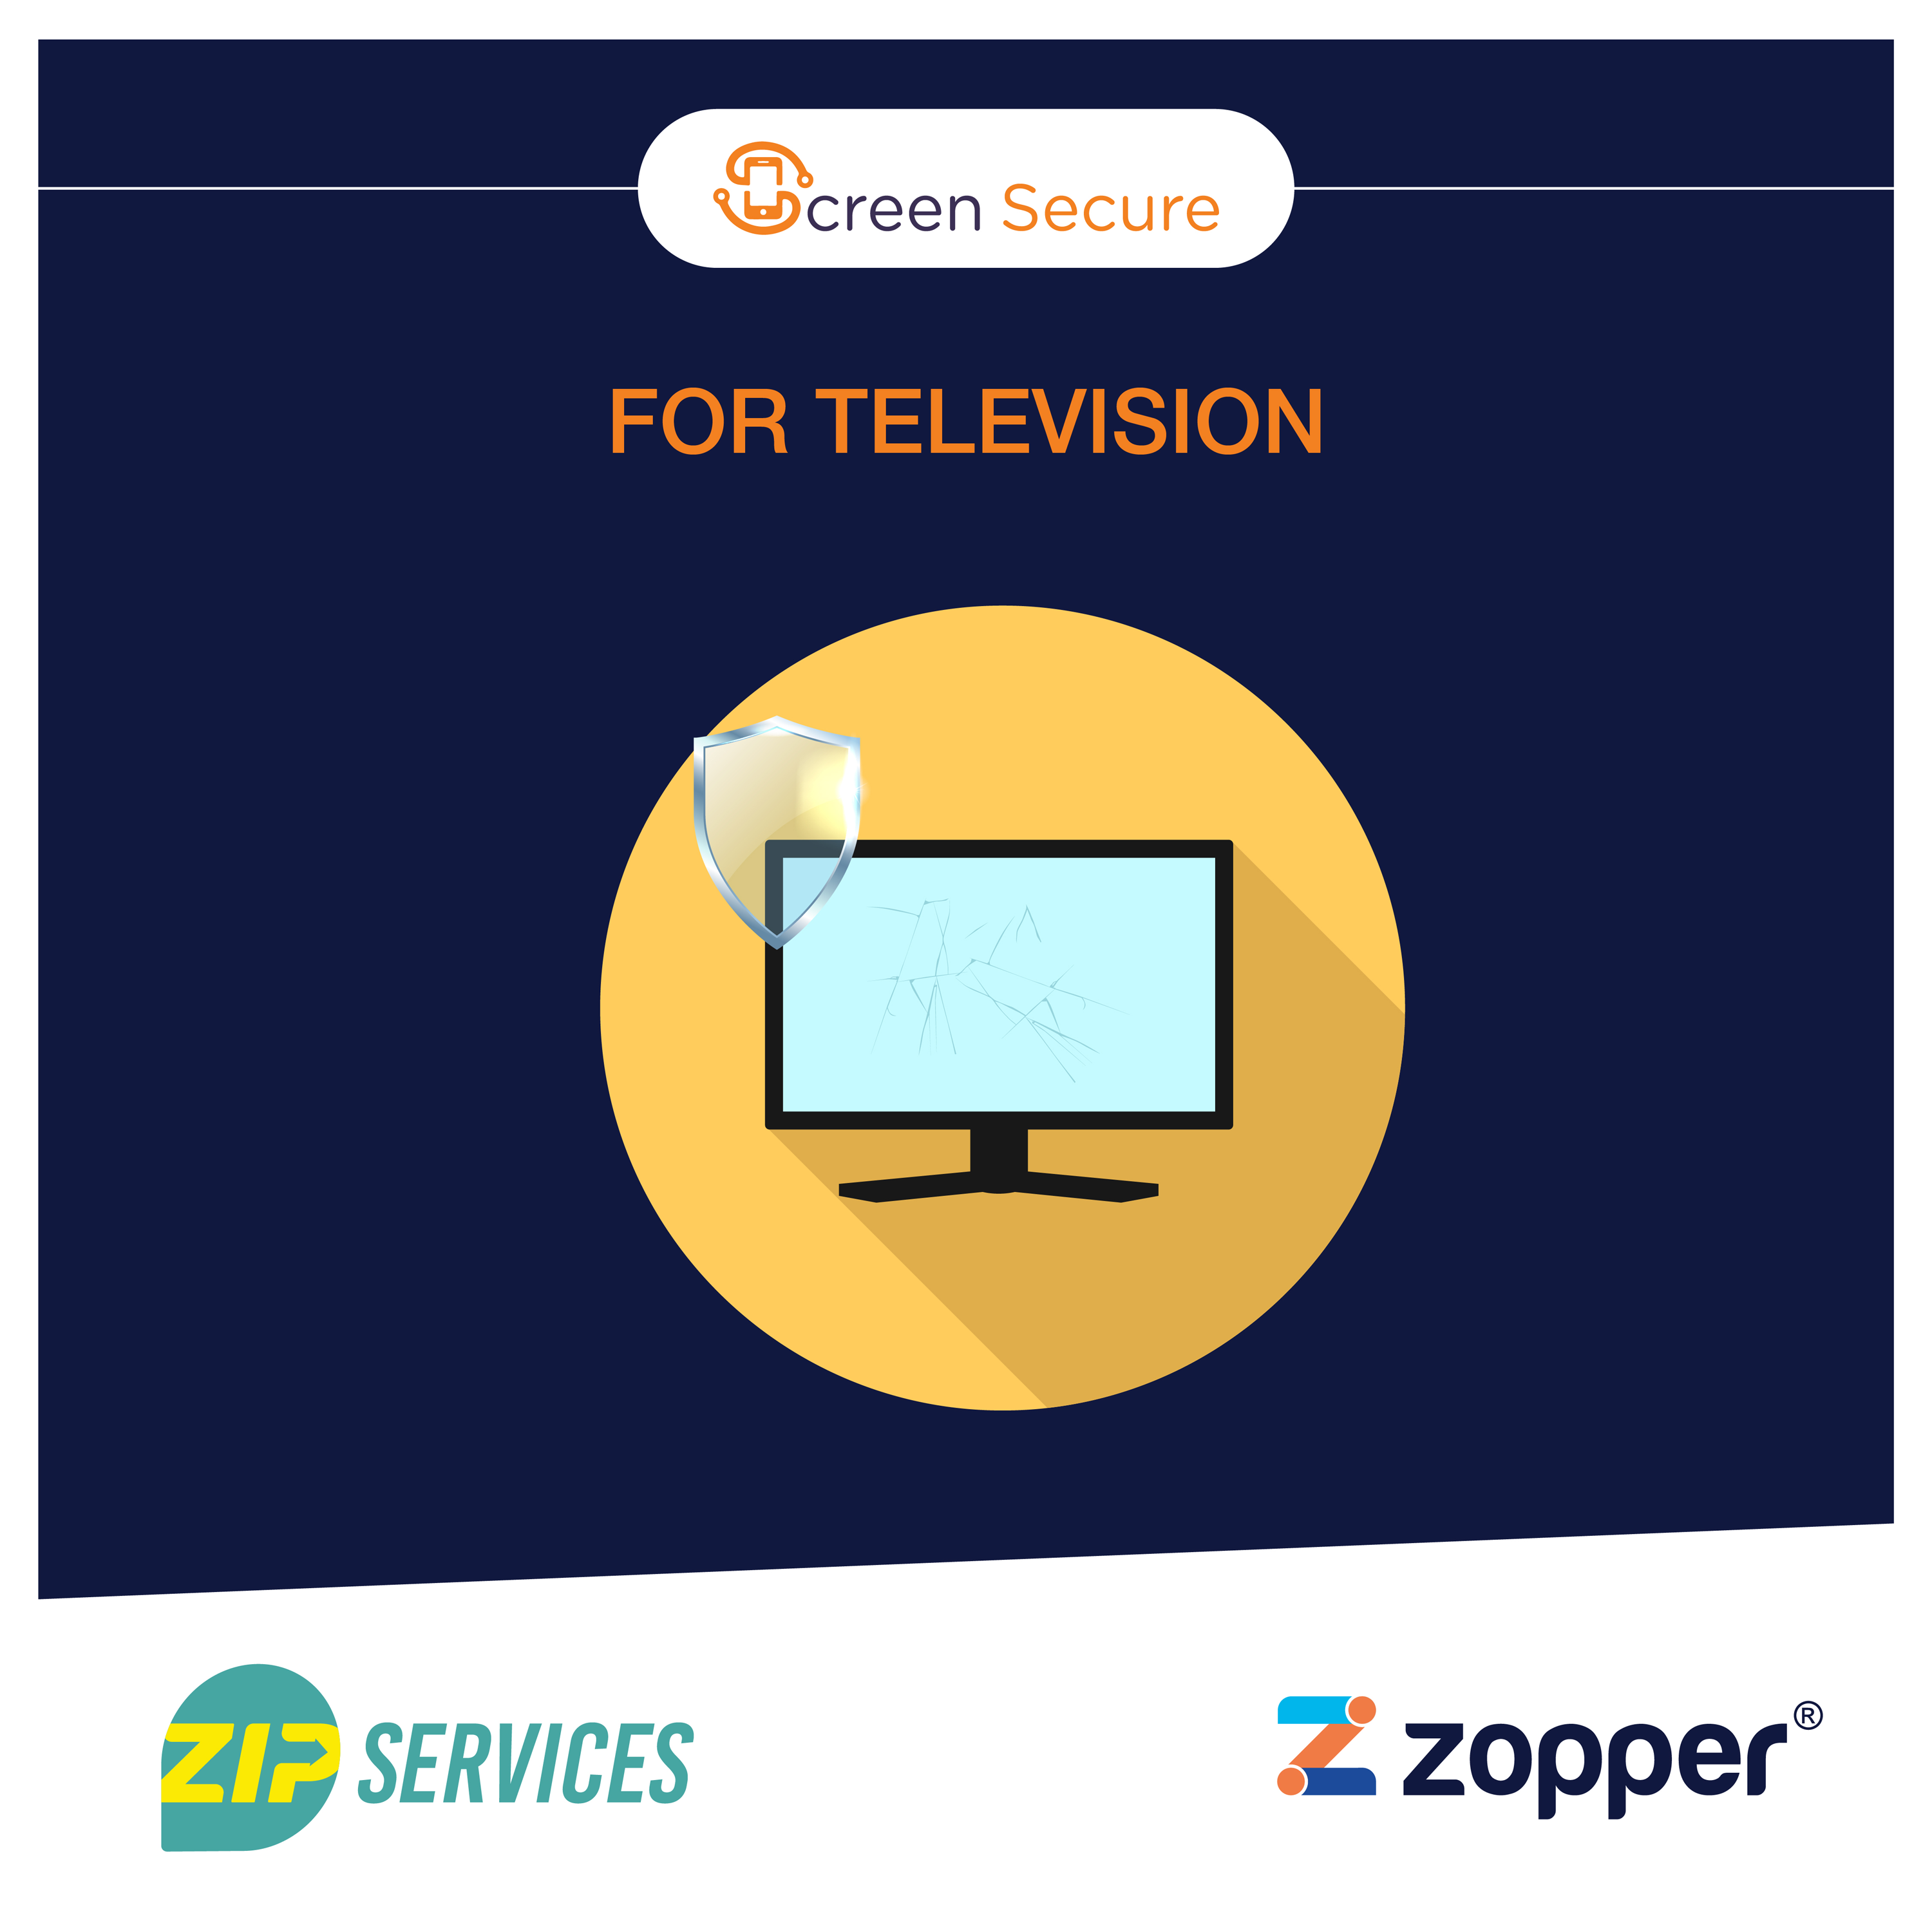 Zopper 1 Year Accidental & Liquid Damage Warranty for Television Rs.500001 - Rs.750000_1